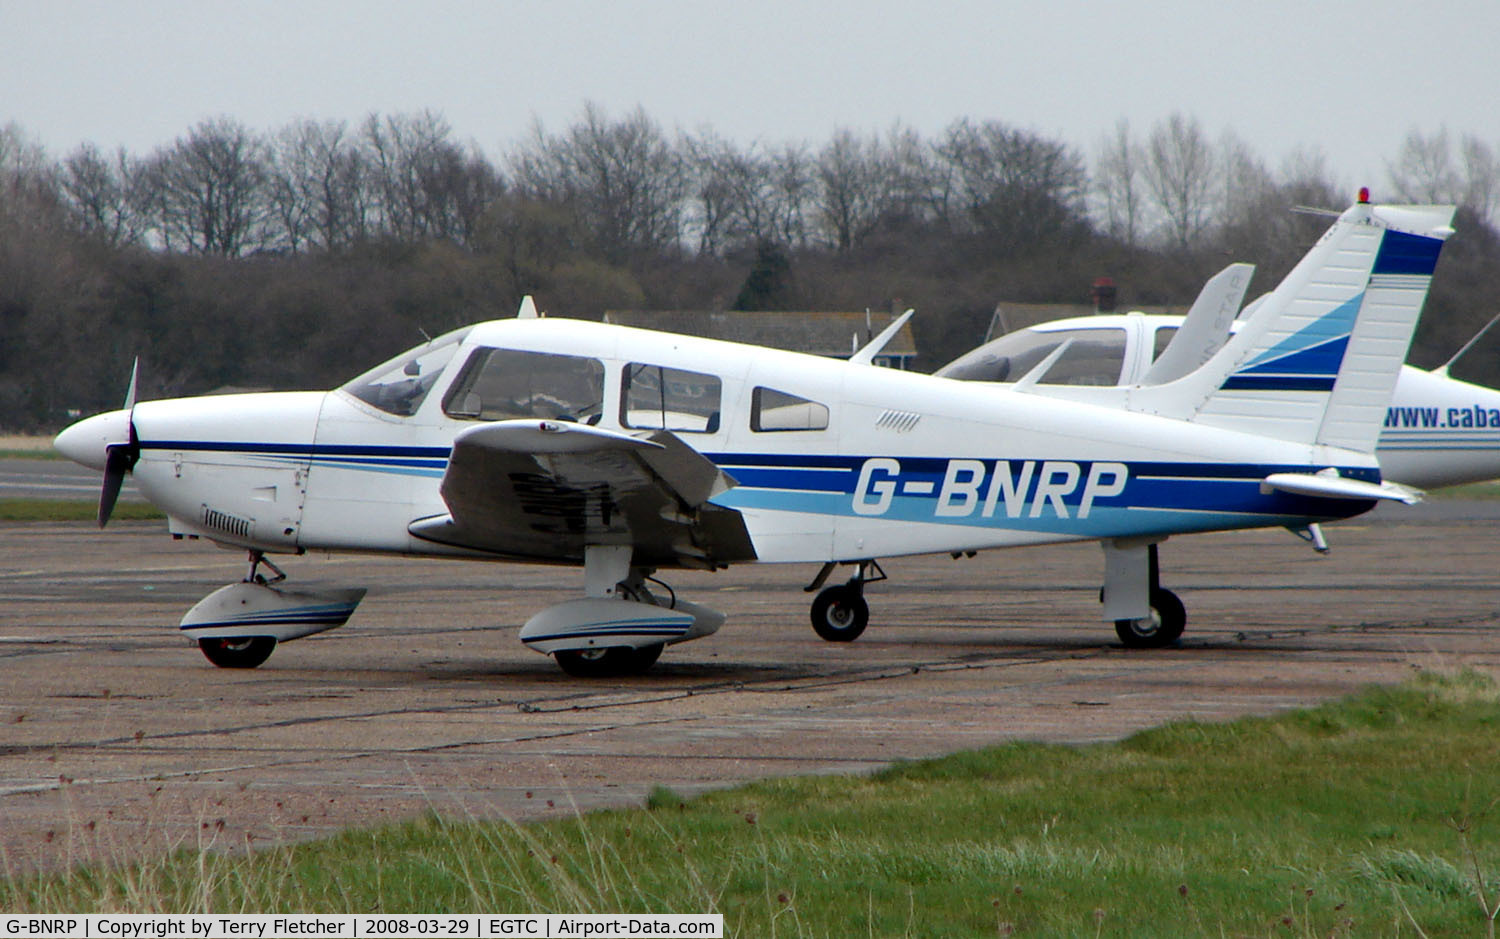 G-BNRP, 1977 Piper PA-28-181 Cherokee Archer II C/N 28-7790528, Part of the General Aviation activity at Cranfield